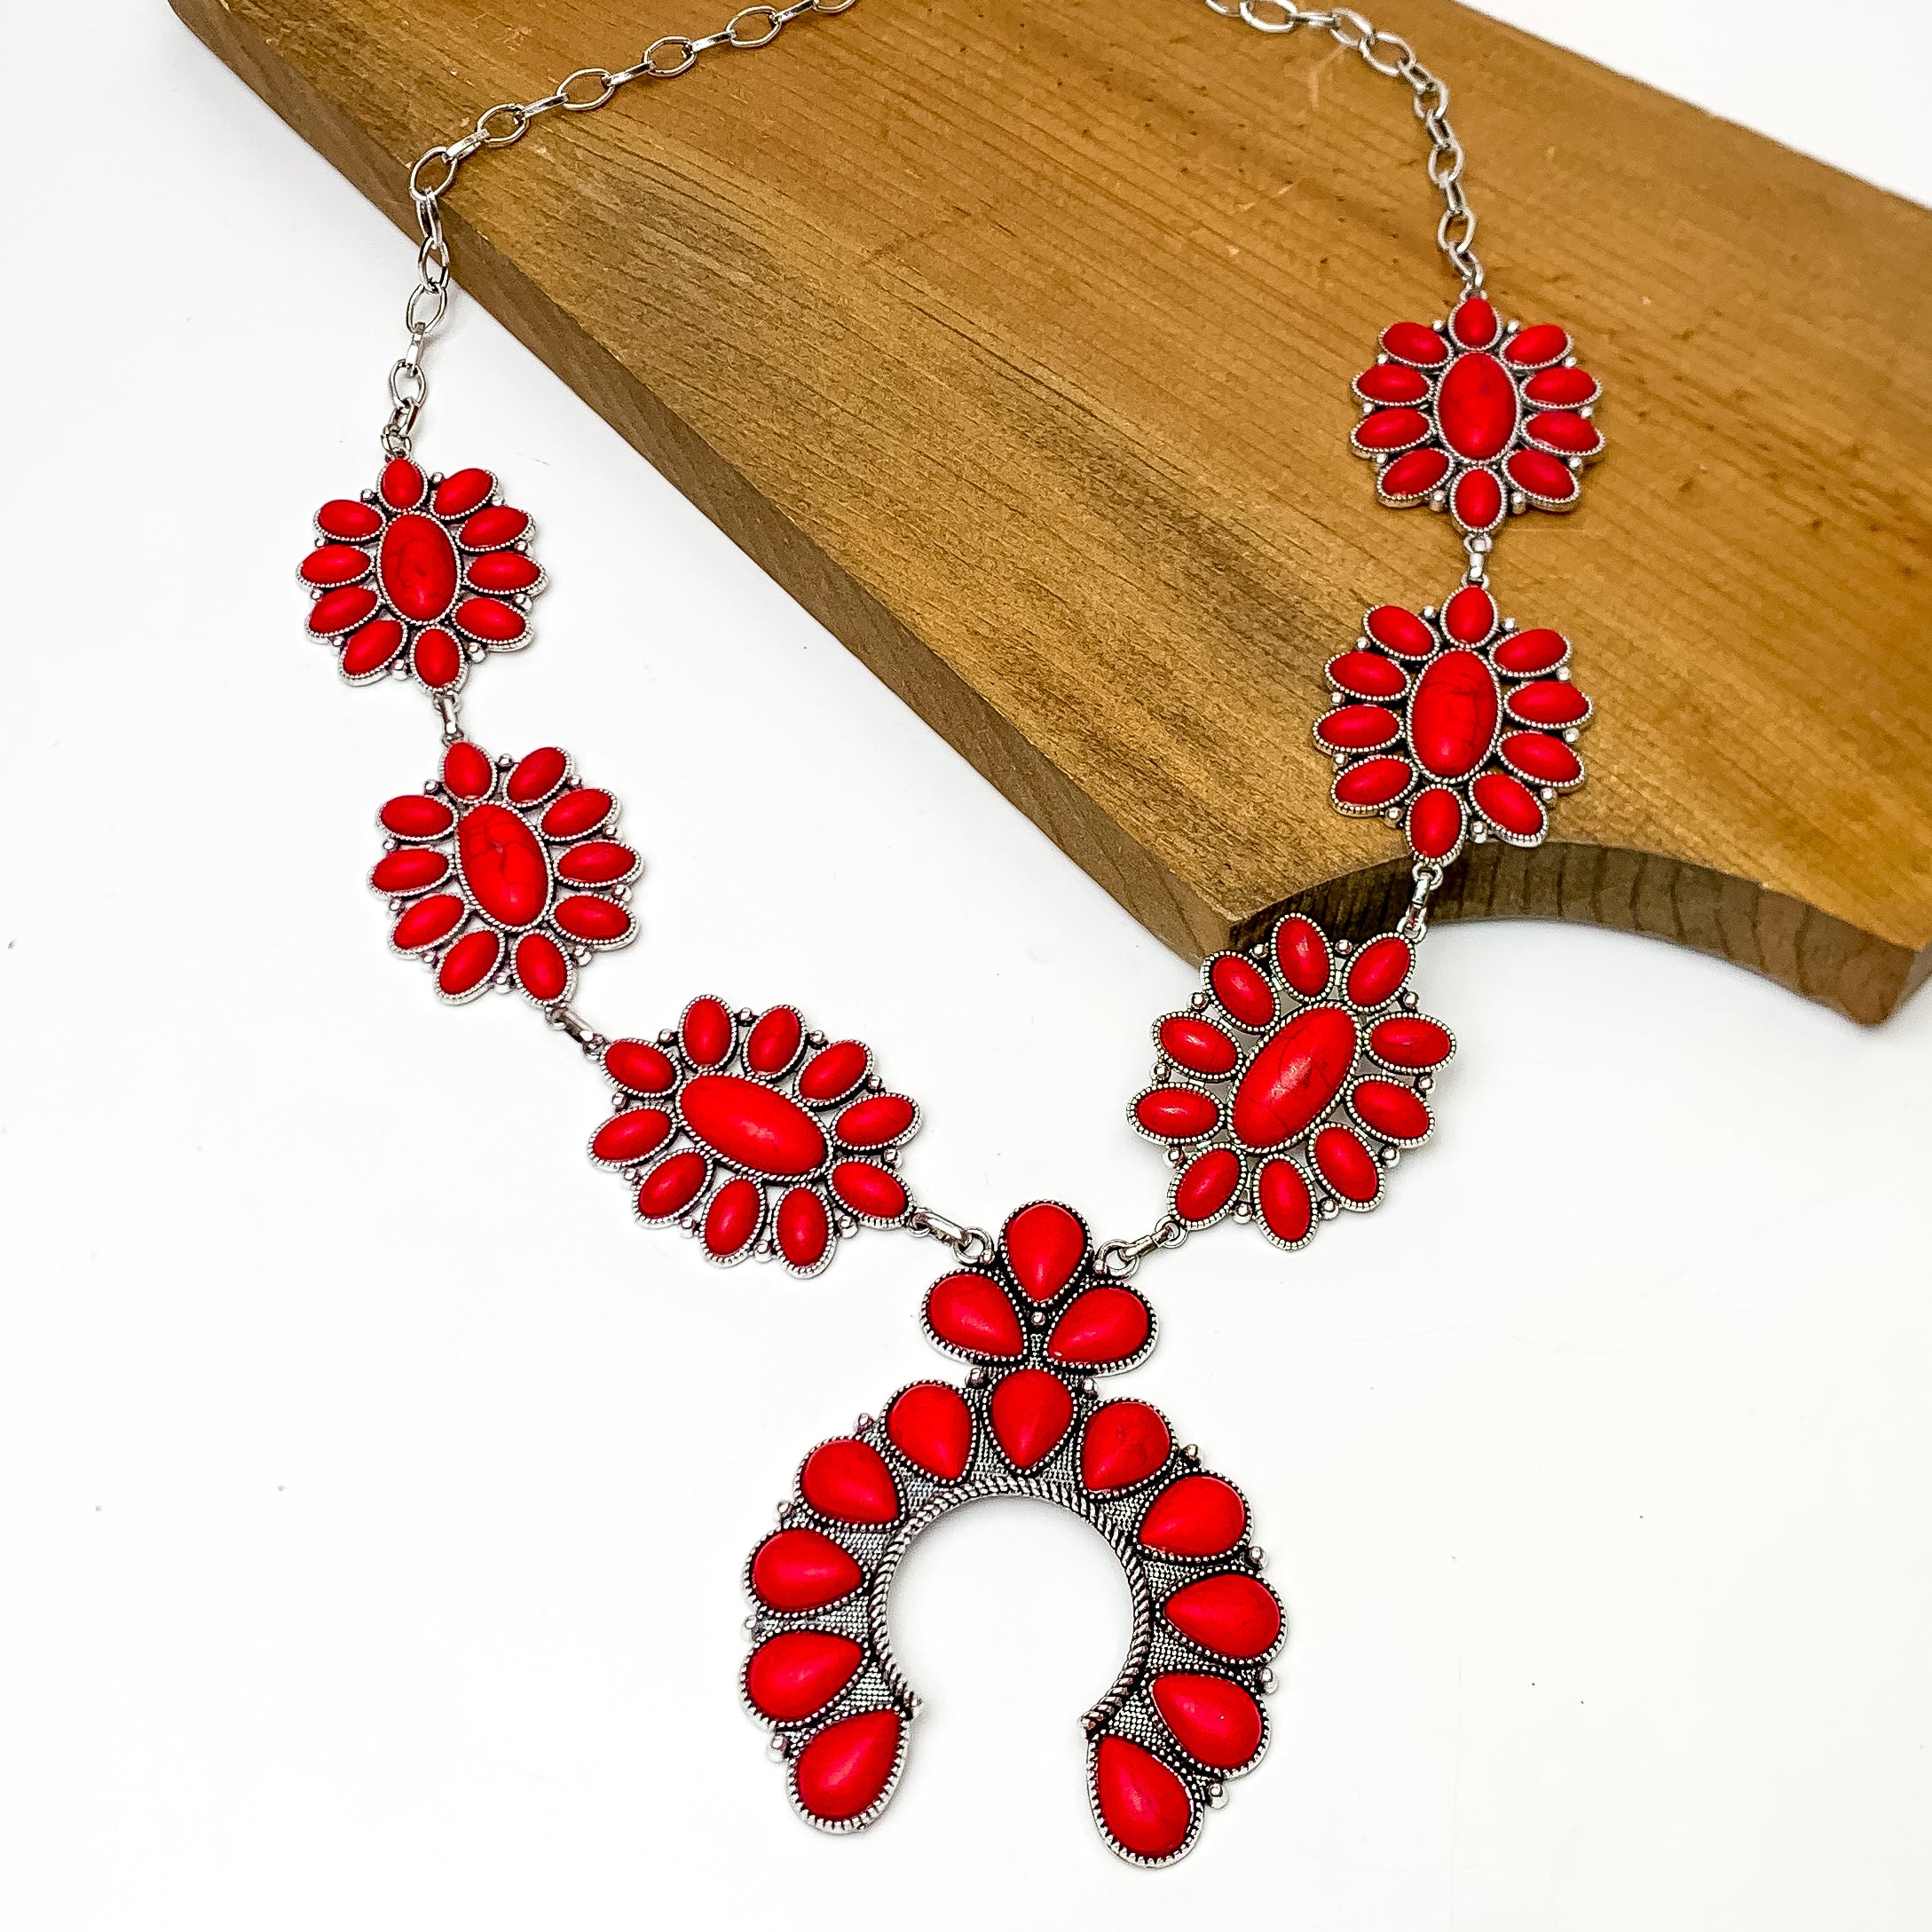 Squash Necklace with Oval Flowers in Silver Tone and Red. This necklace is pictured on a white background laying against a wood piece.